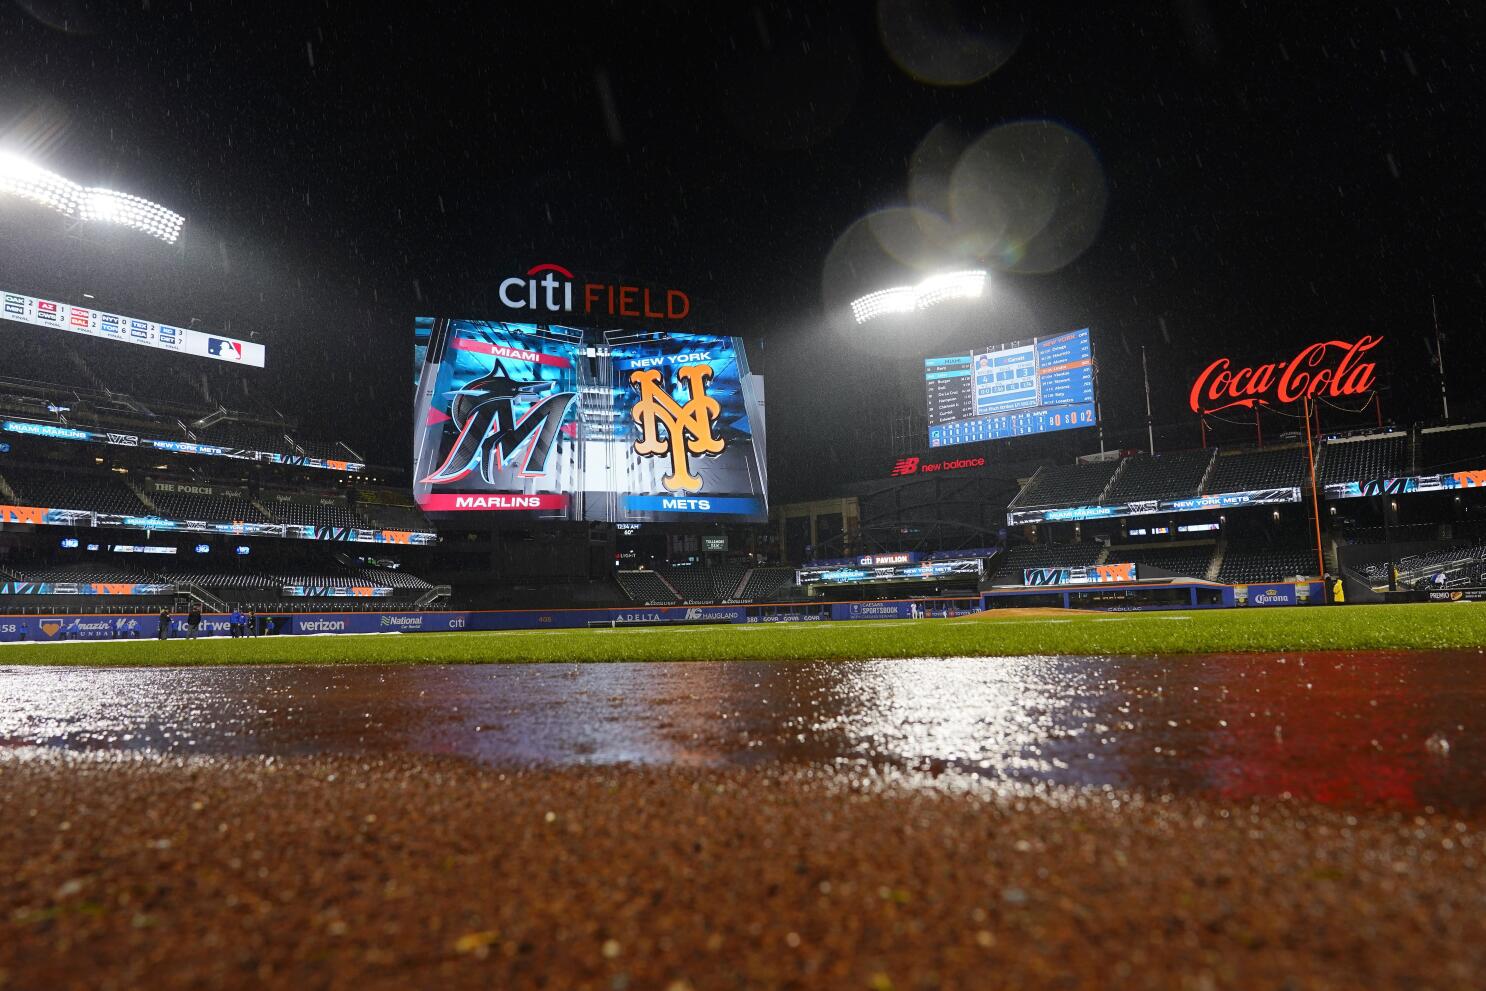 Marlins rally in 9th inning to take 2-1 lead over Mets before rain